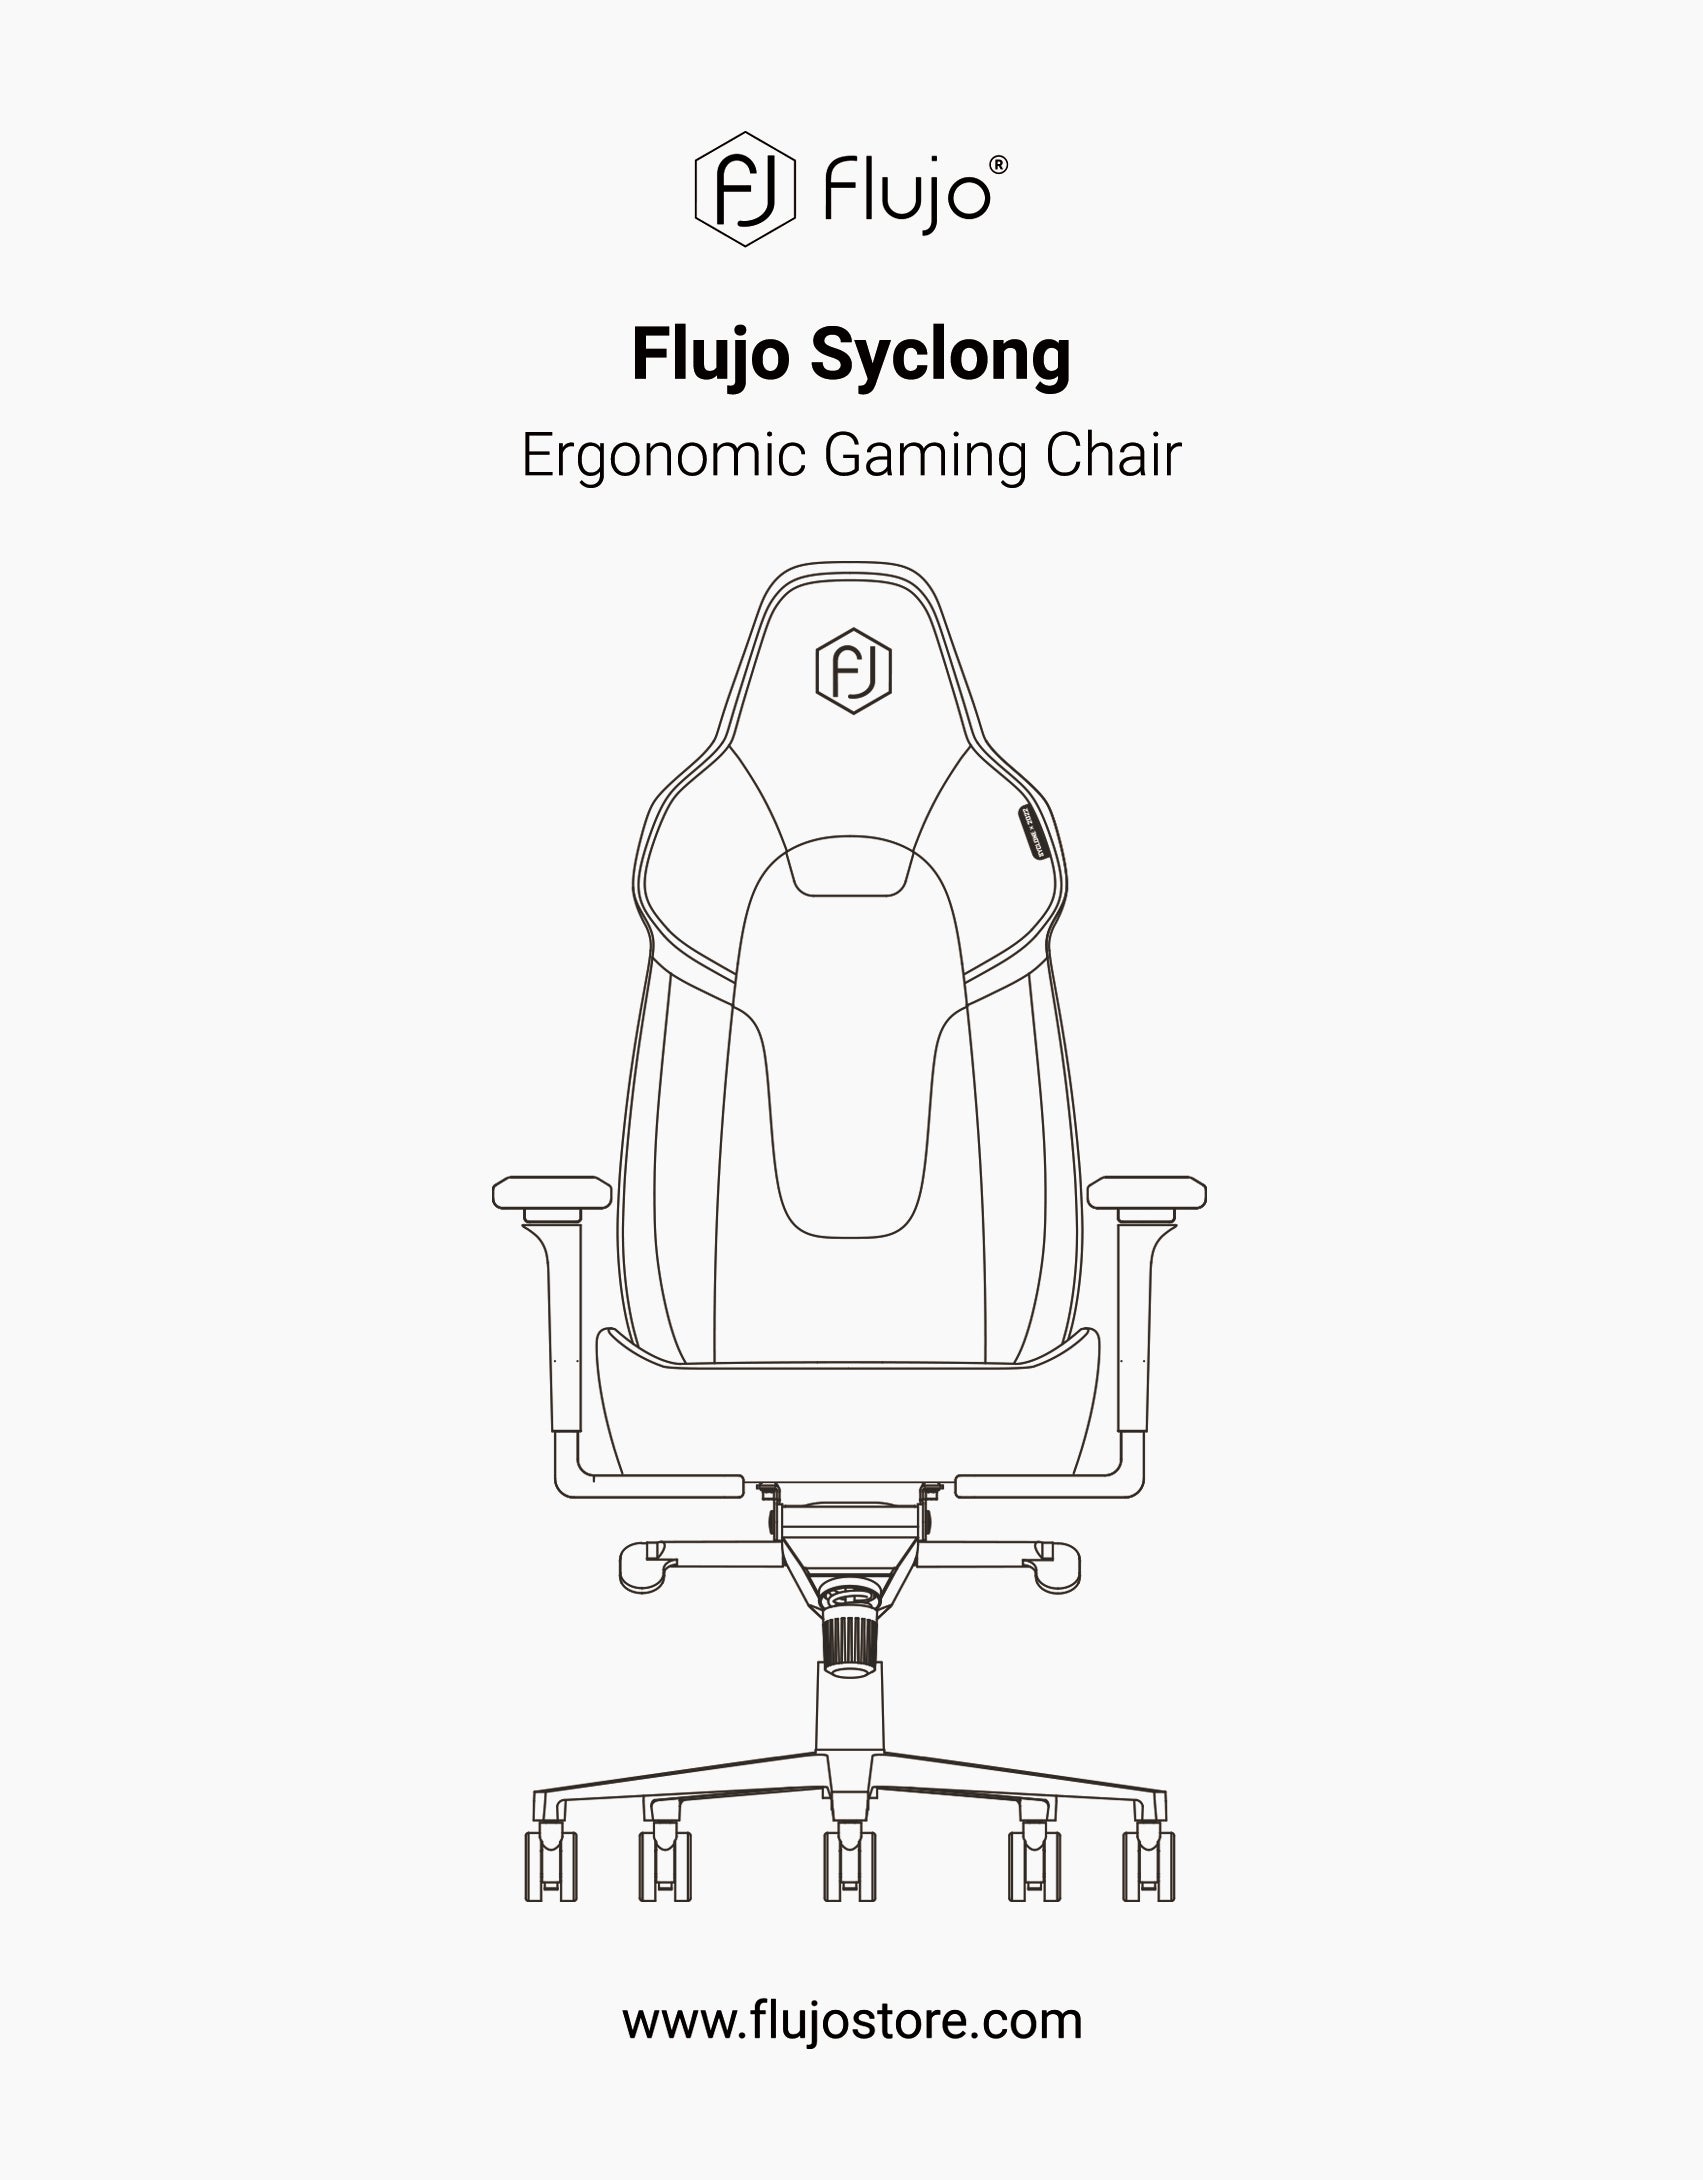 Depiction of the Flujo Syclone Ergonomic Gaming Chair, designed with a sleek, contoured backrest for gaming comfort, featured on the Flujo store.